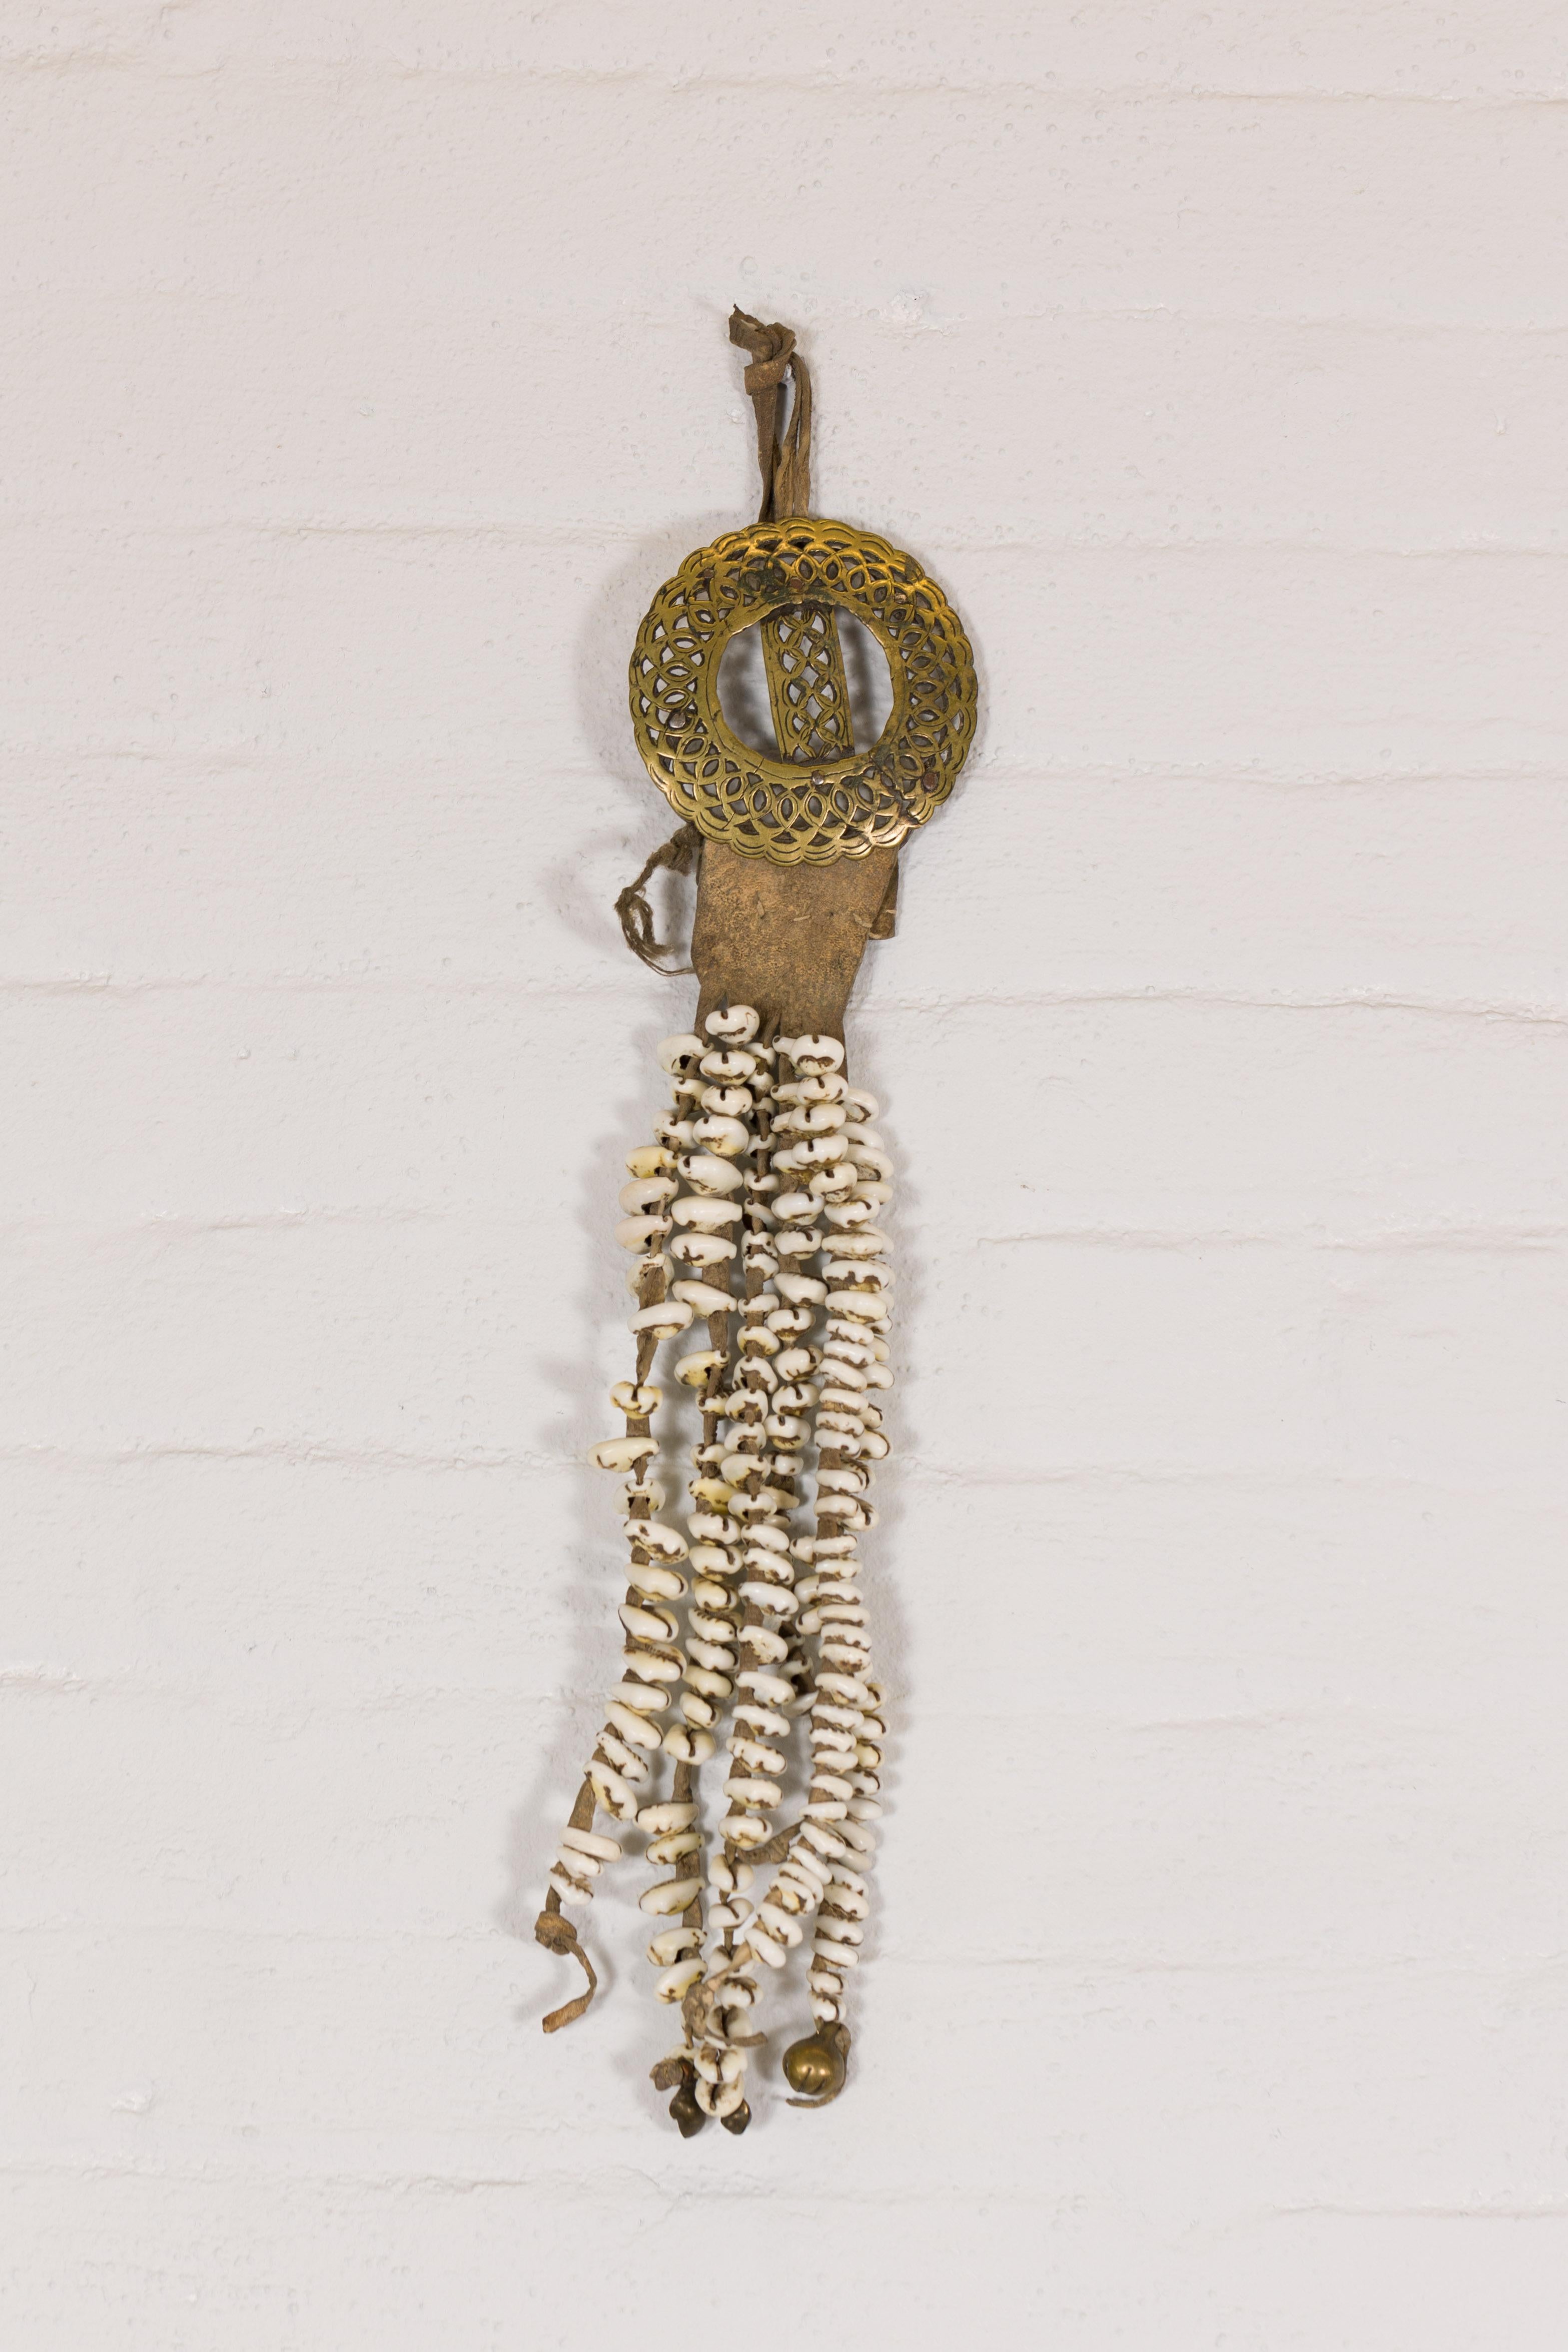 An antique body ornament from India, Nepal or Tibet, made of strands of old Himalayan shells secured to a brass circular buckle with pierced motifs. Embark on a cultural odyssey with this antique body ornament hailing from the mystic terrains of